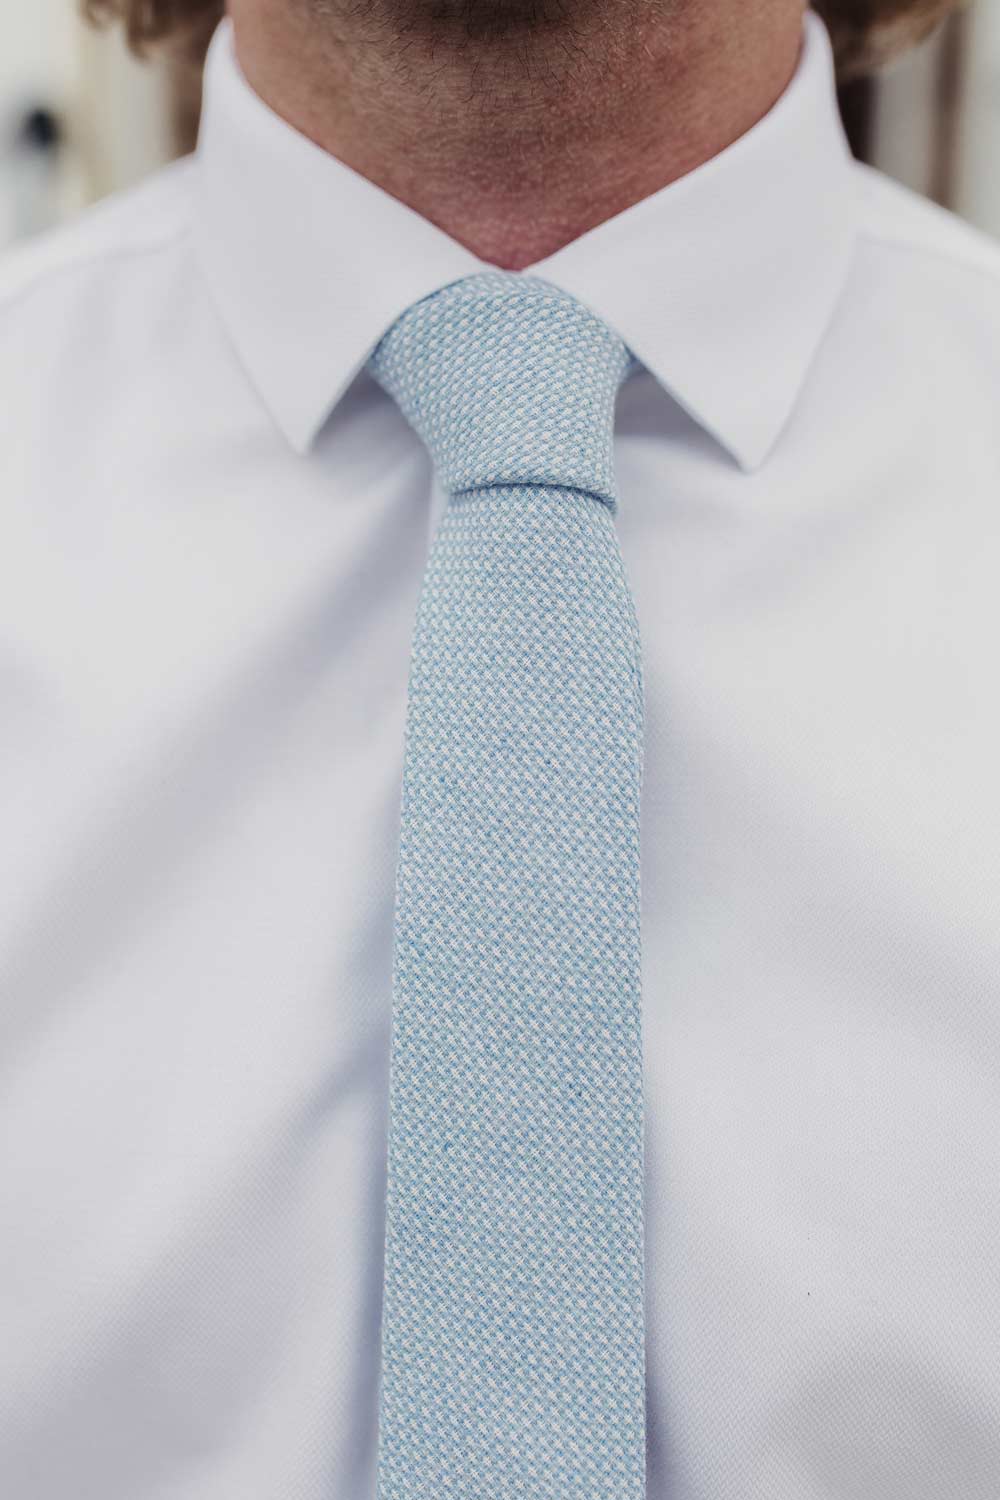 Frosted Morning tie worn with a white shirt.